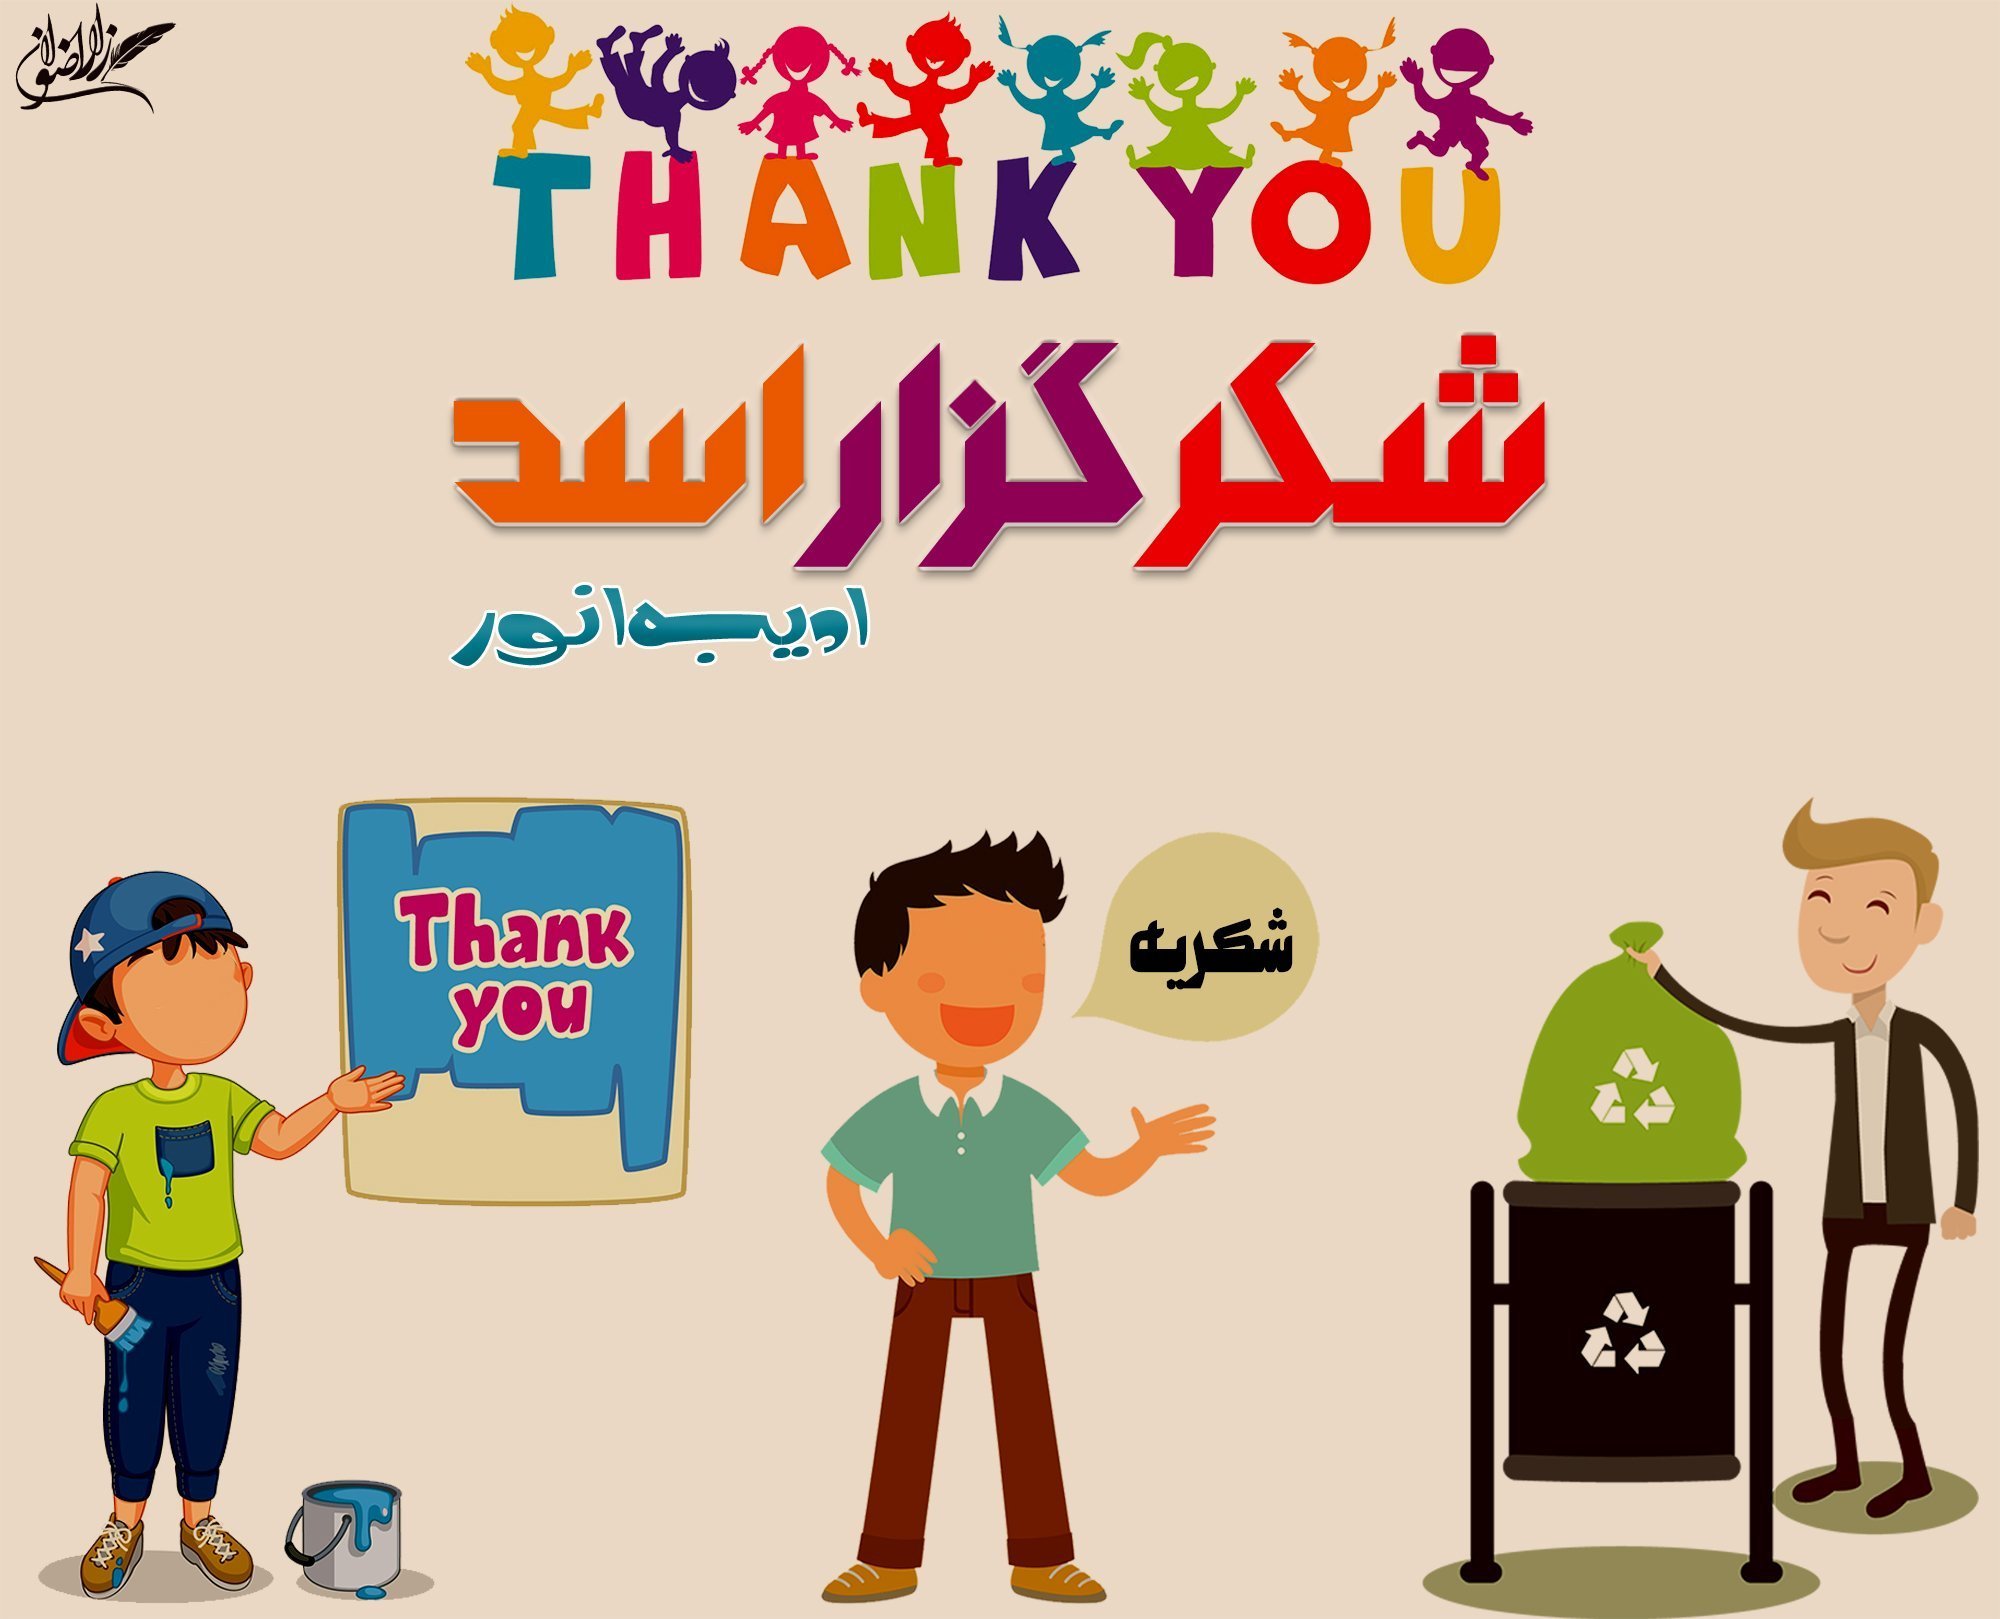 A story for kids in urdu about gratefulness